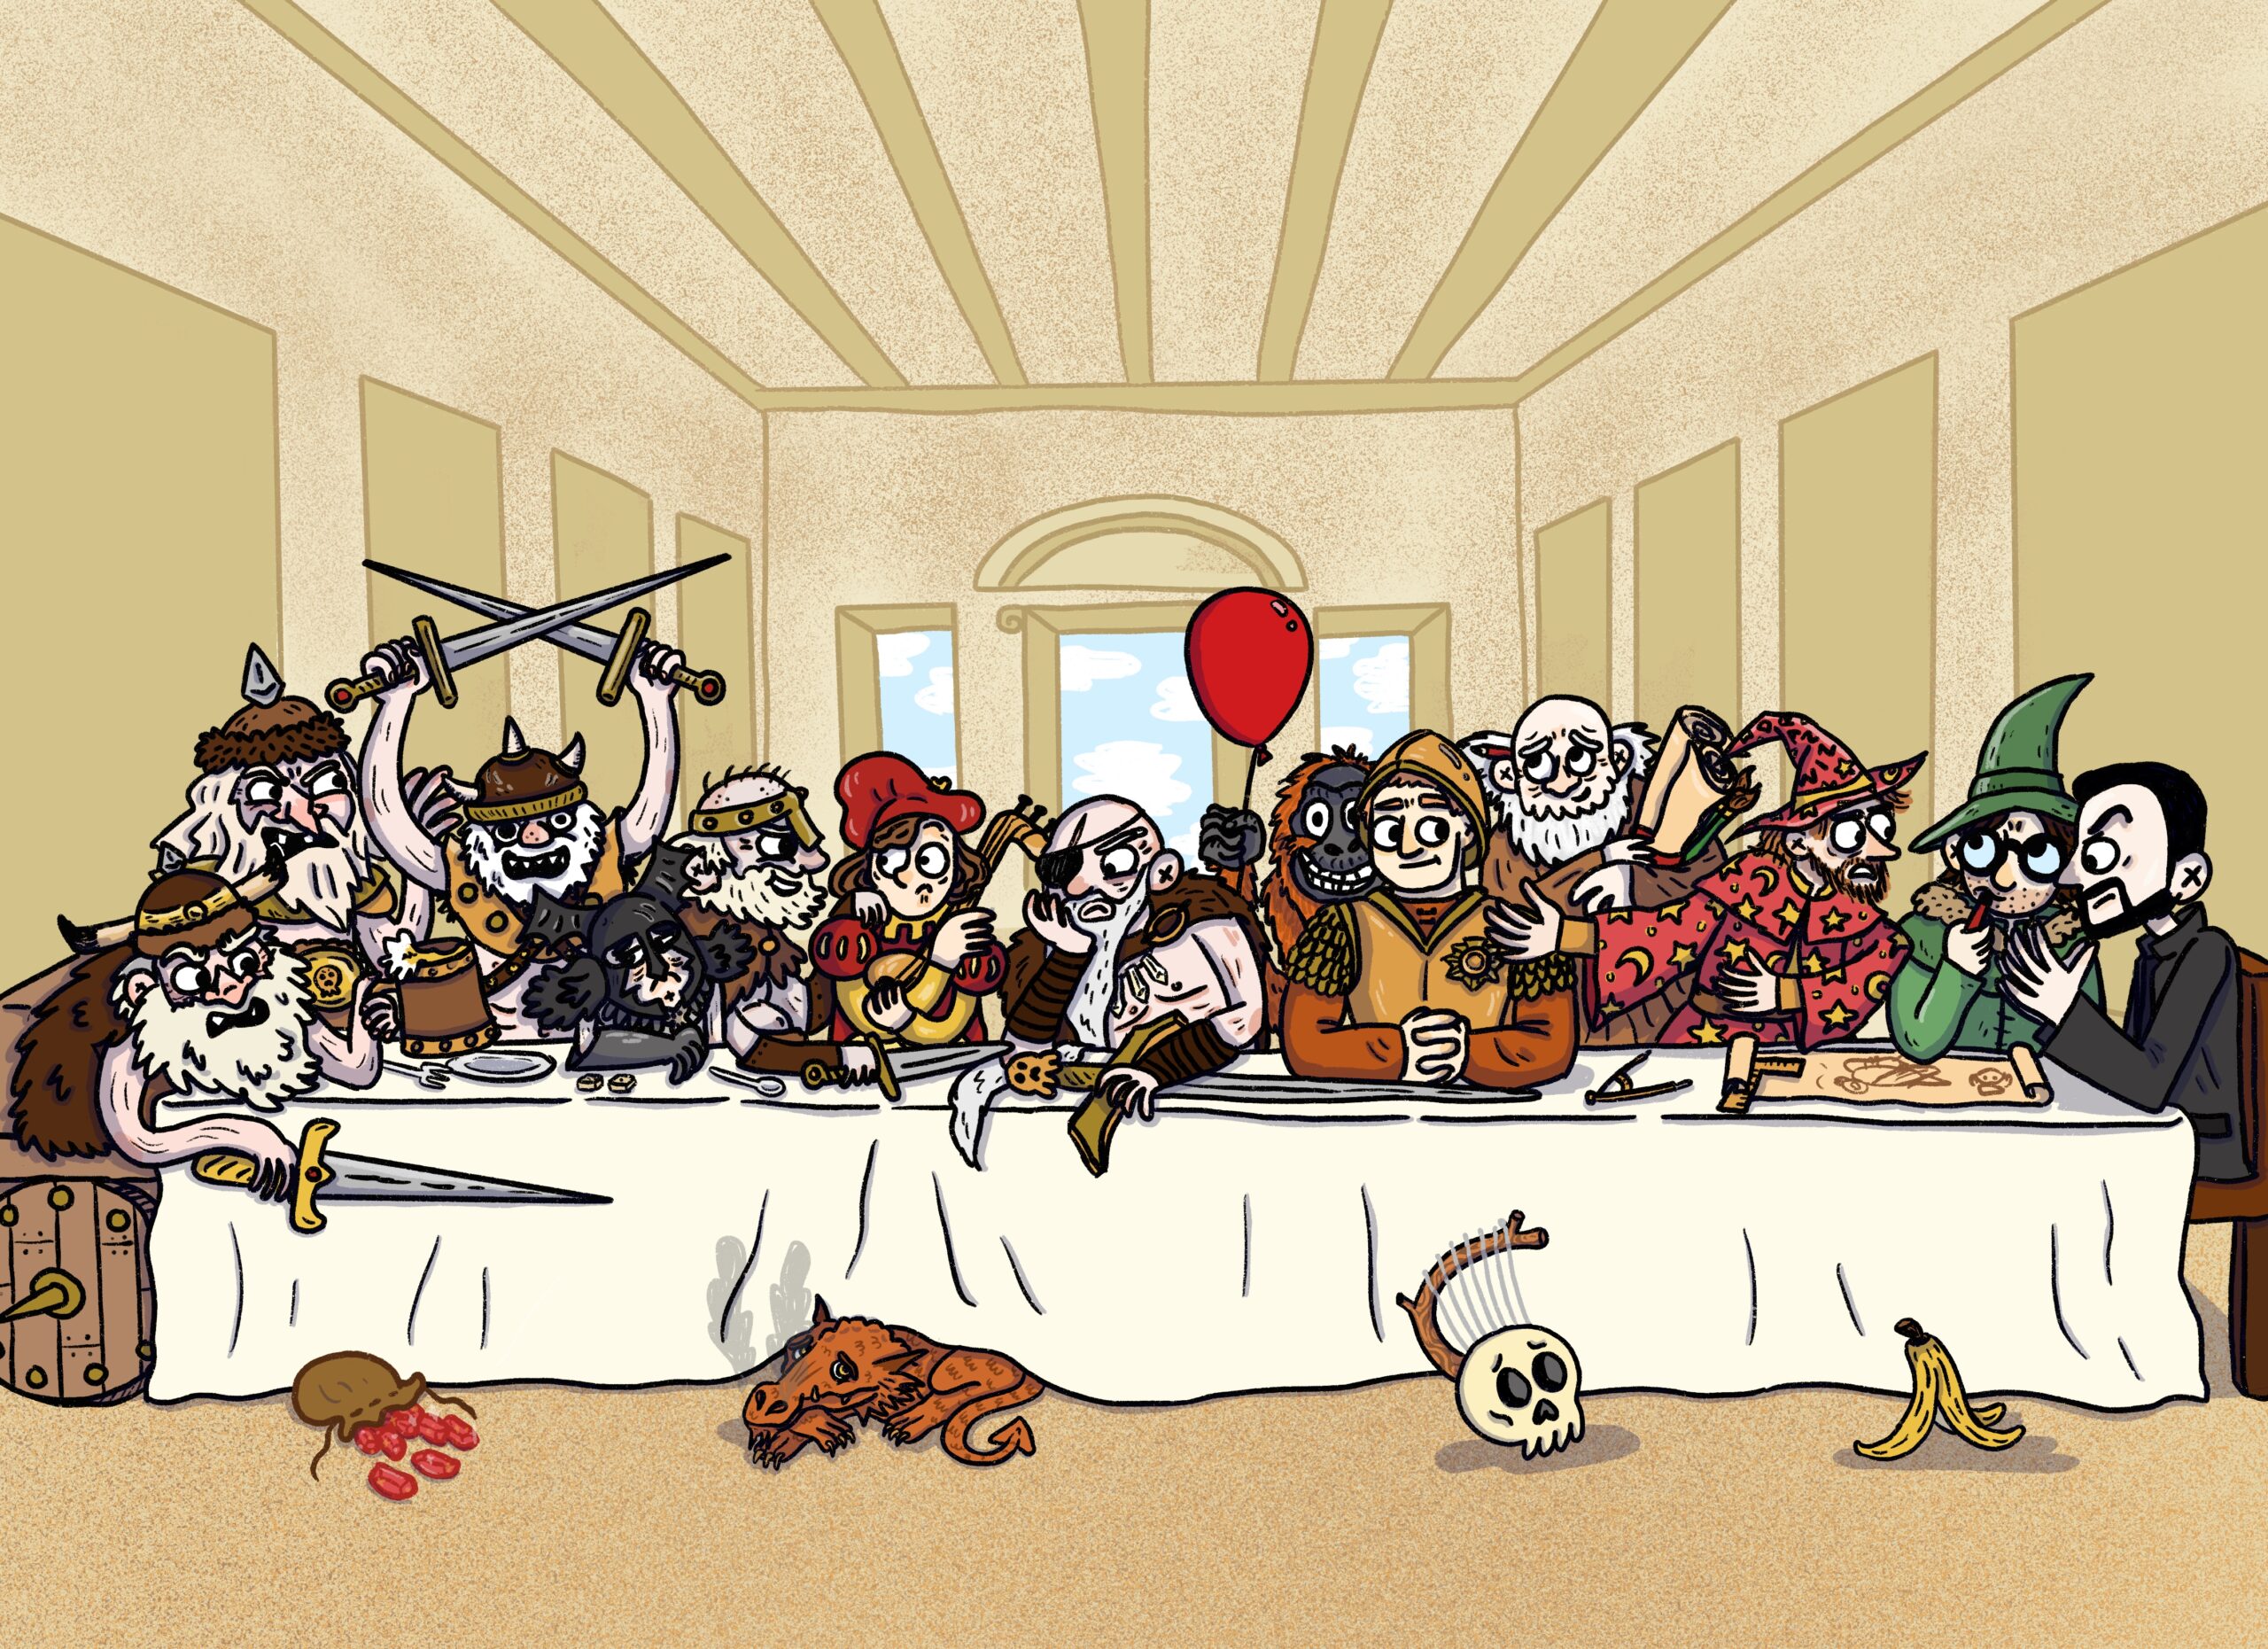 A cartoon illustration of characters from the book The Last Hero, sitting at a long table in the style of Da Vinci's "The Last Supper"